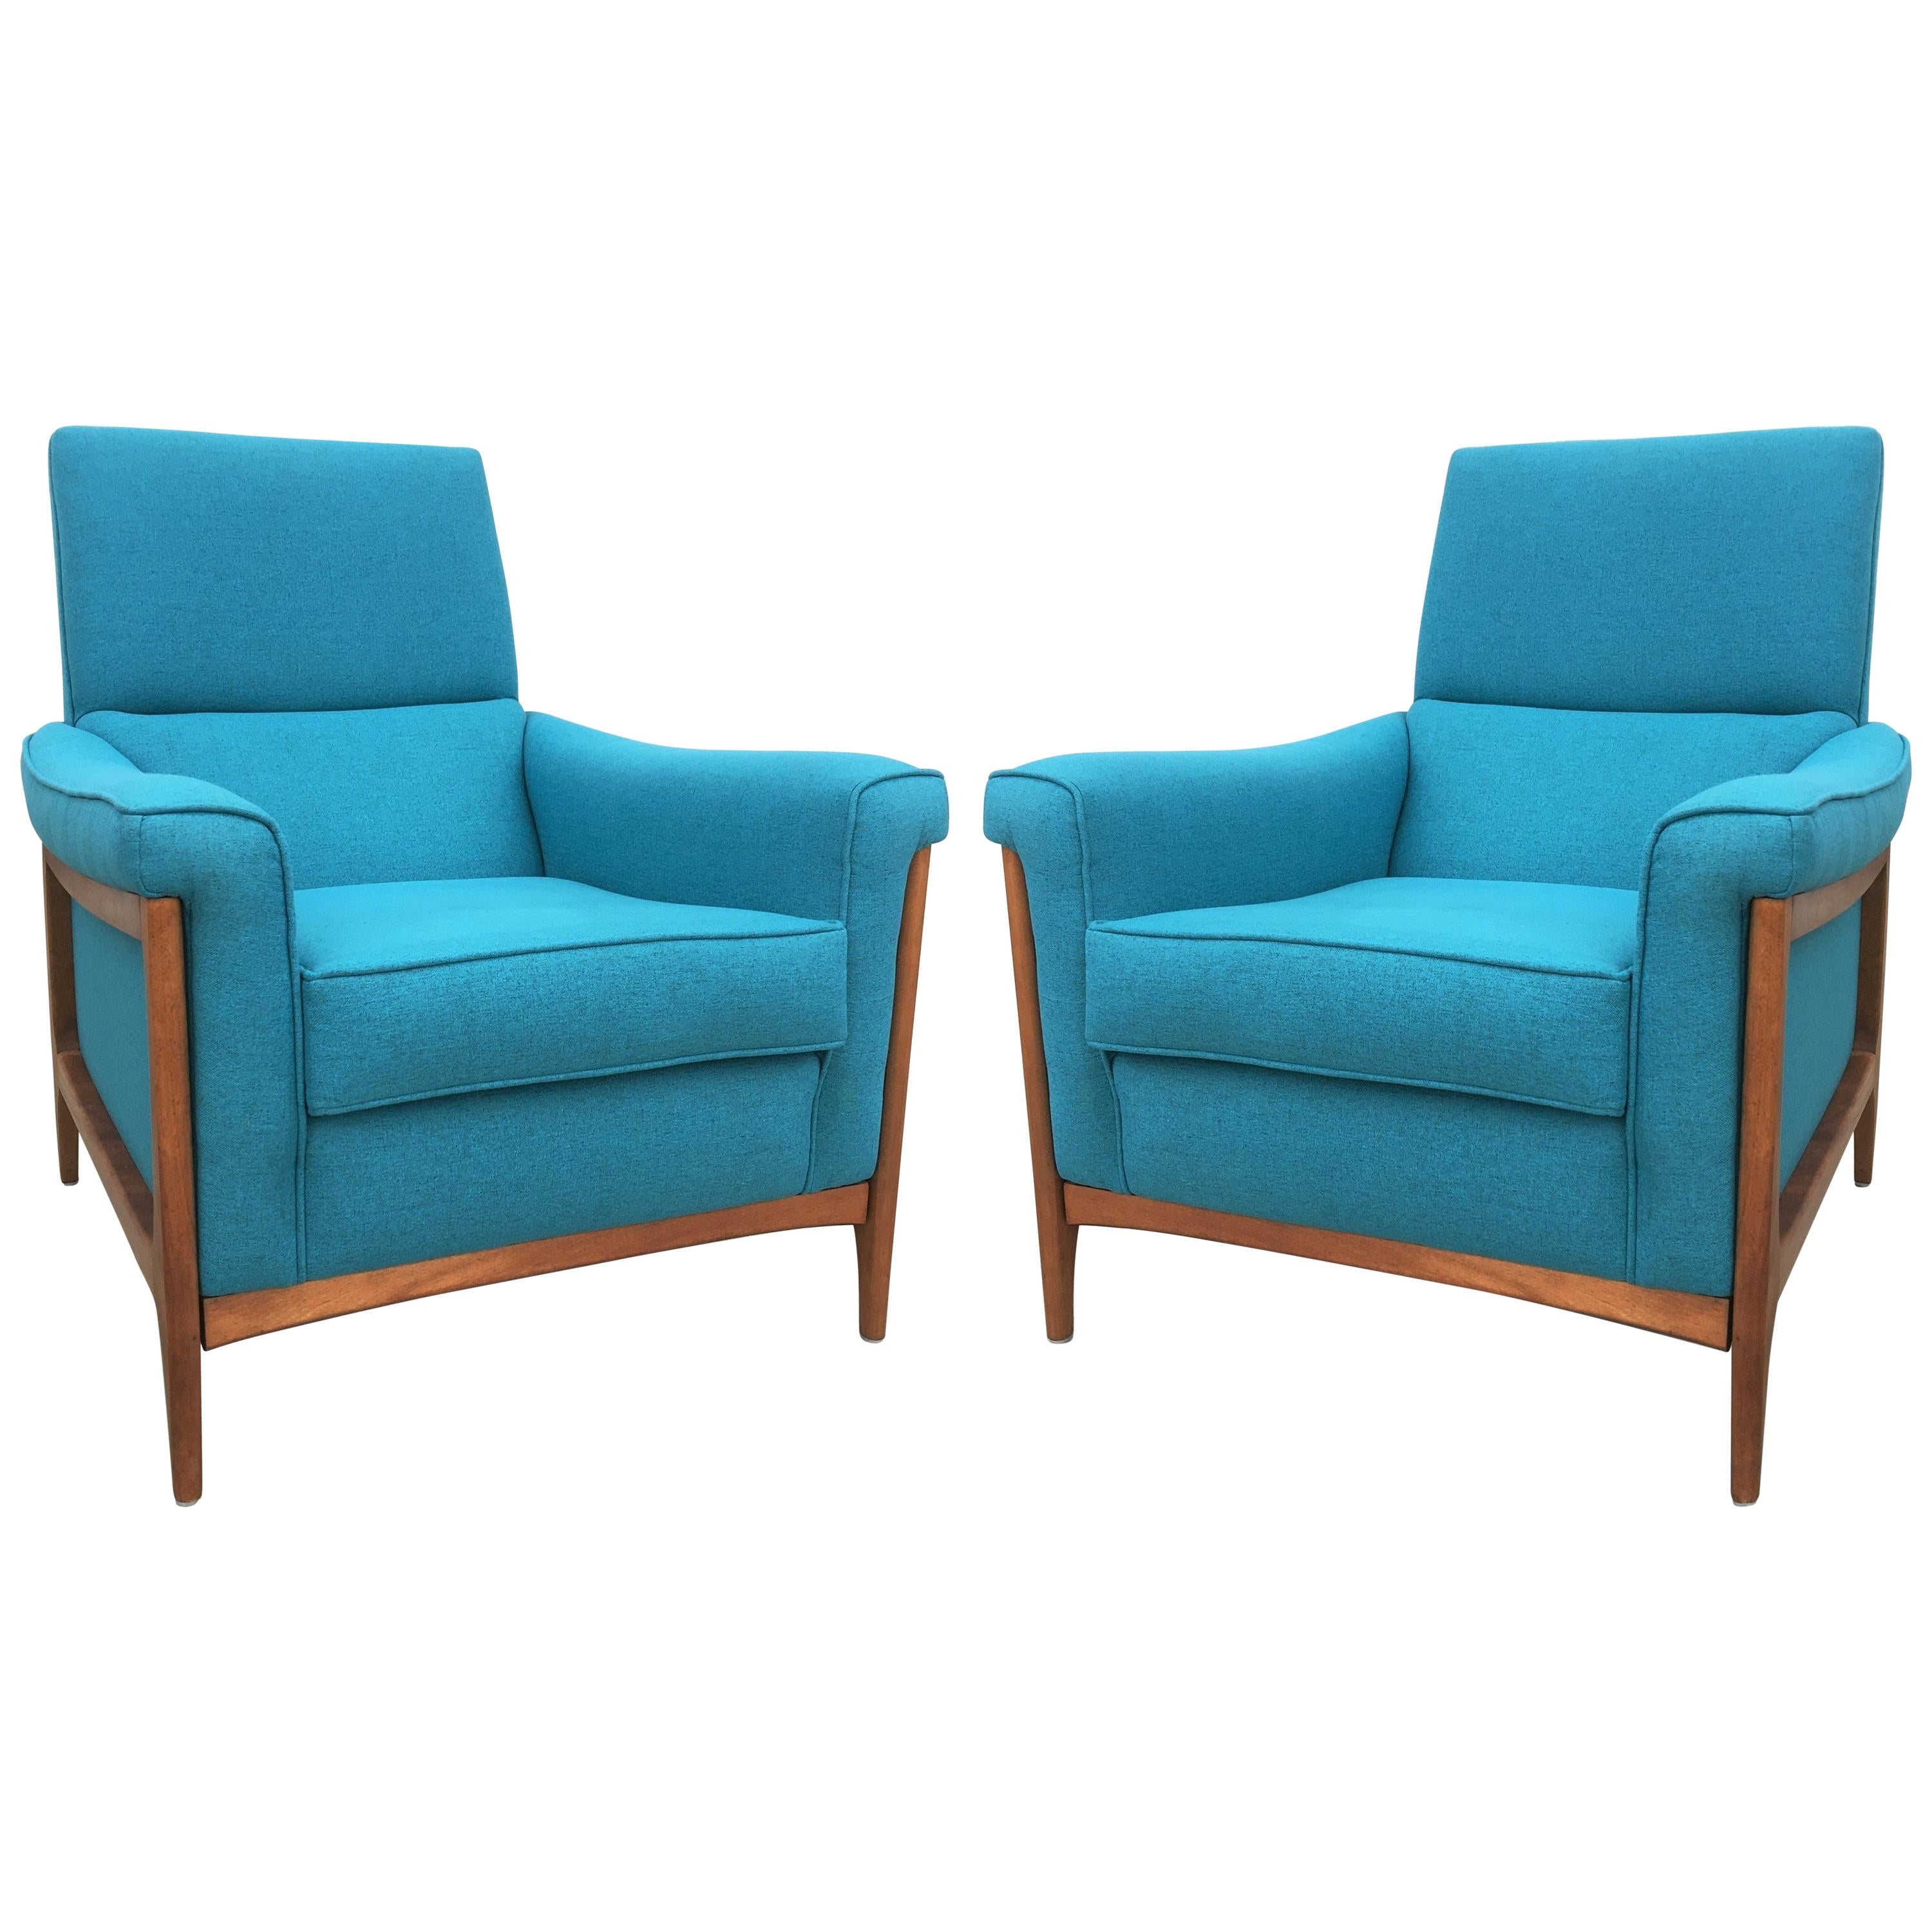 Midcentury Kroehler Upholstered Lounge Chairs